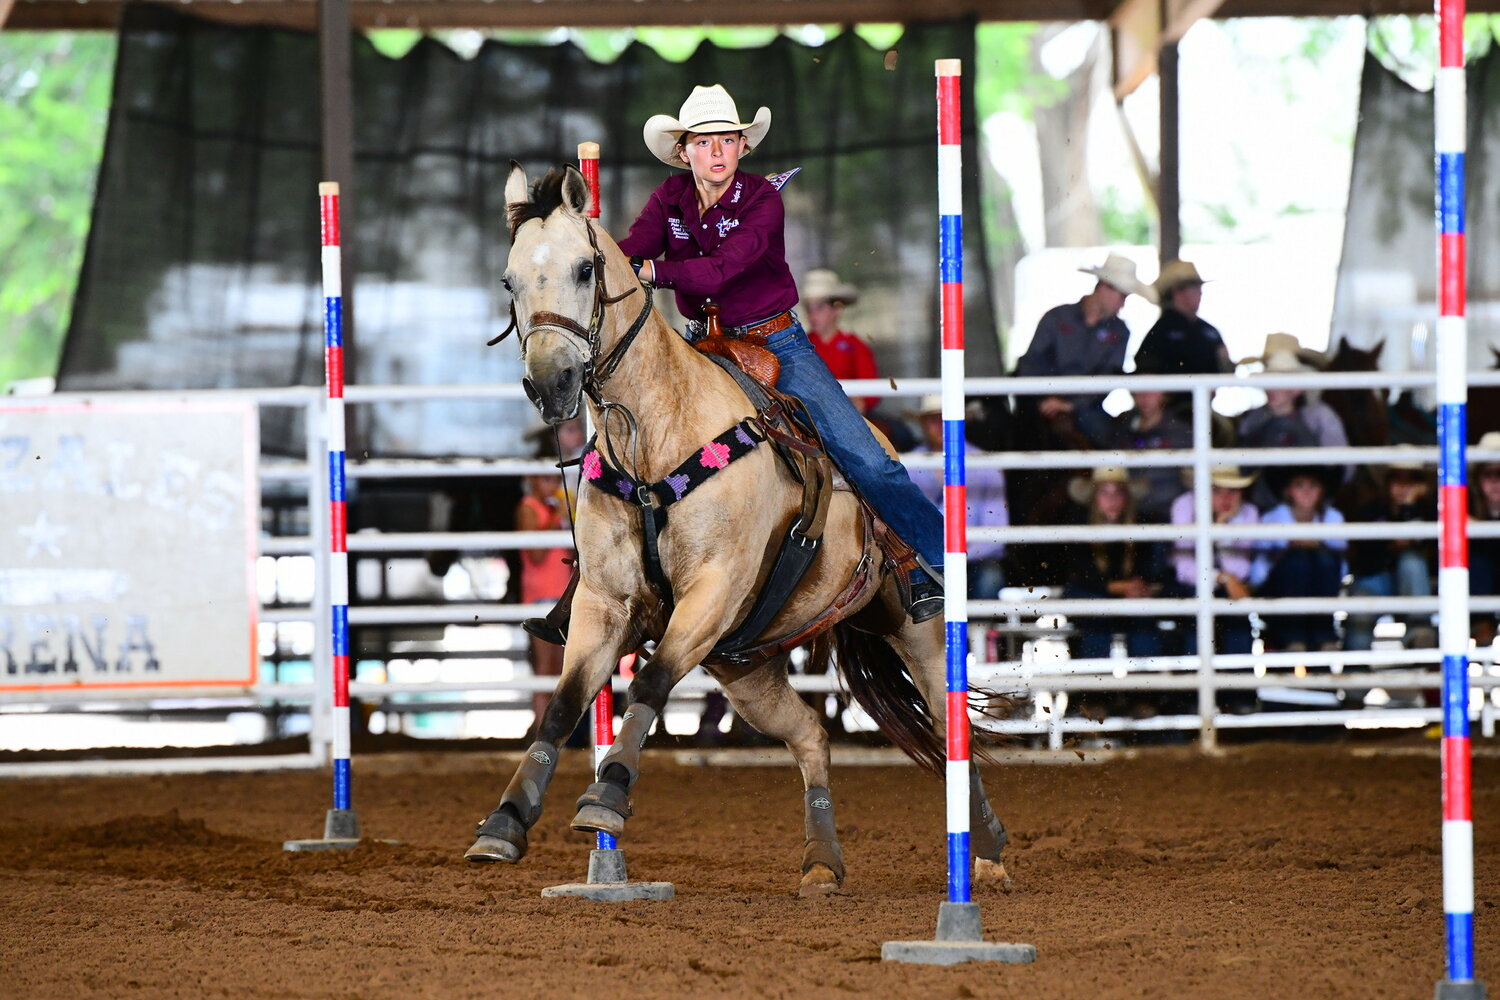 Audrey Thibodeaux moves in between the poles for the pole bending competition of the Texas High School Rodeo.